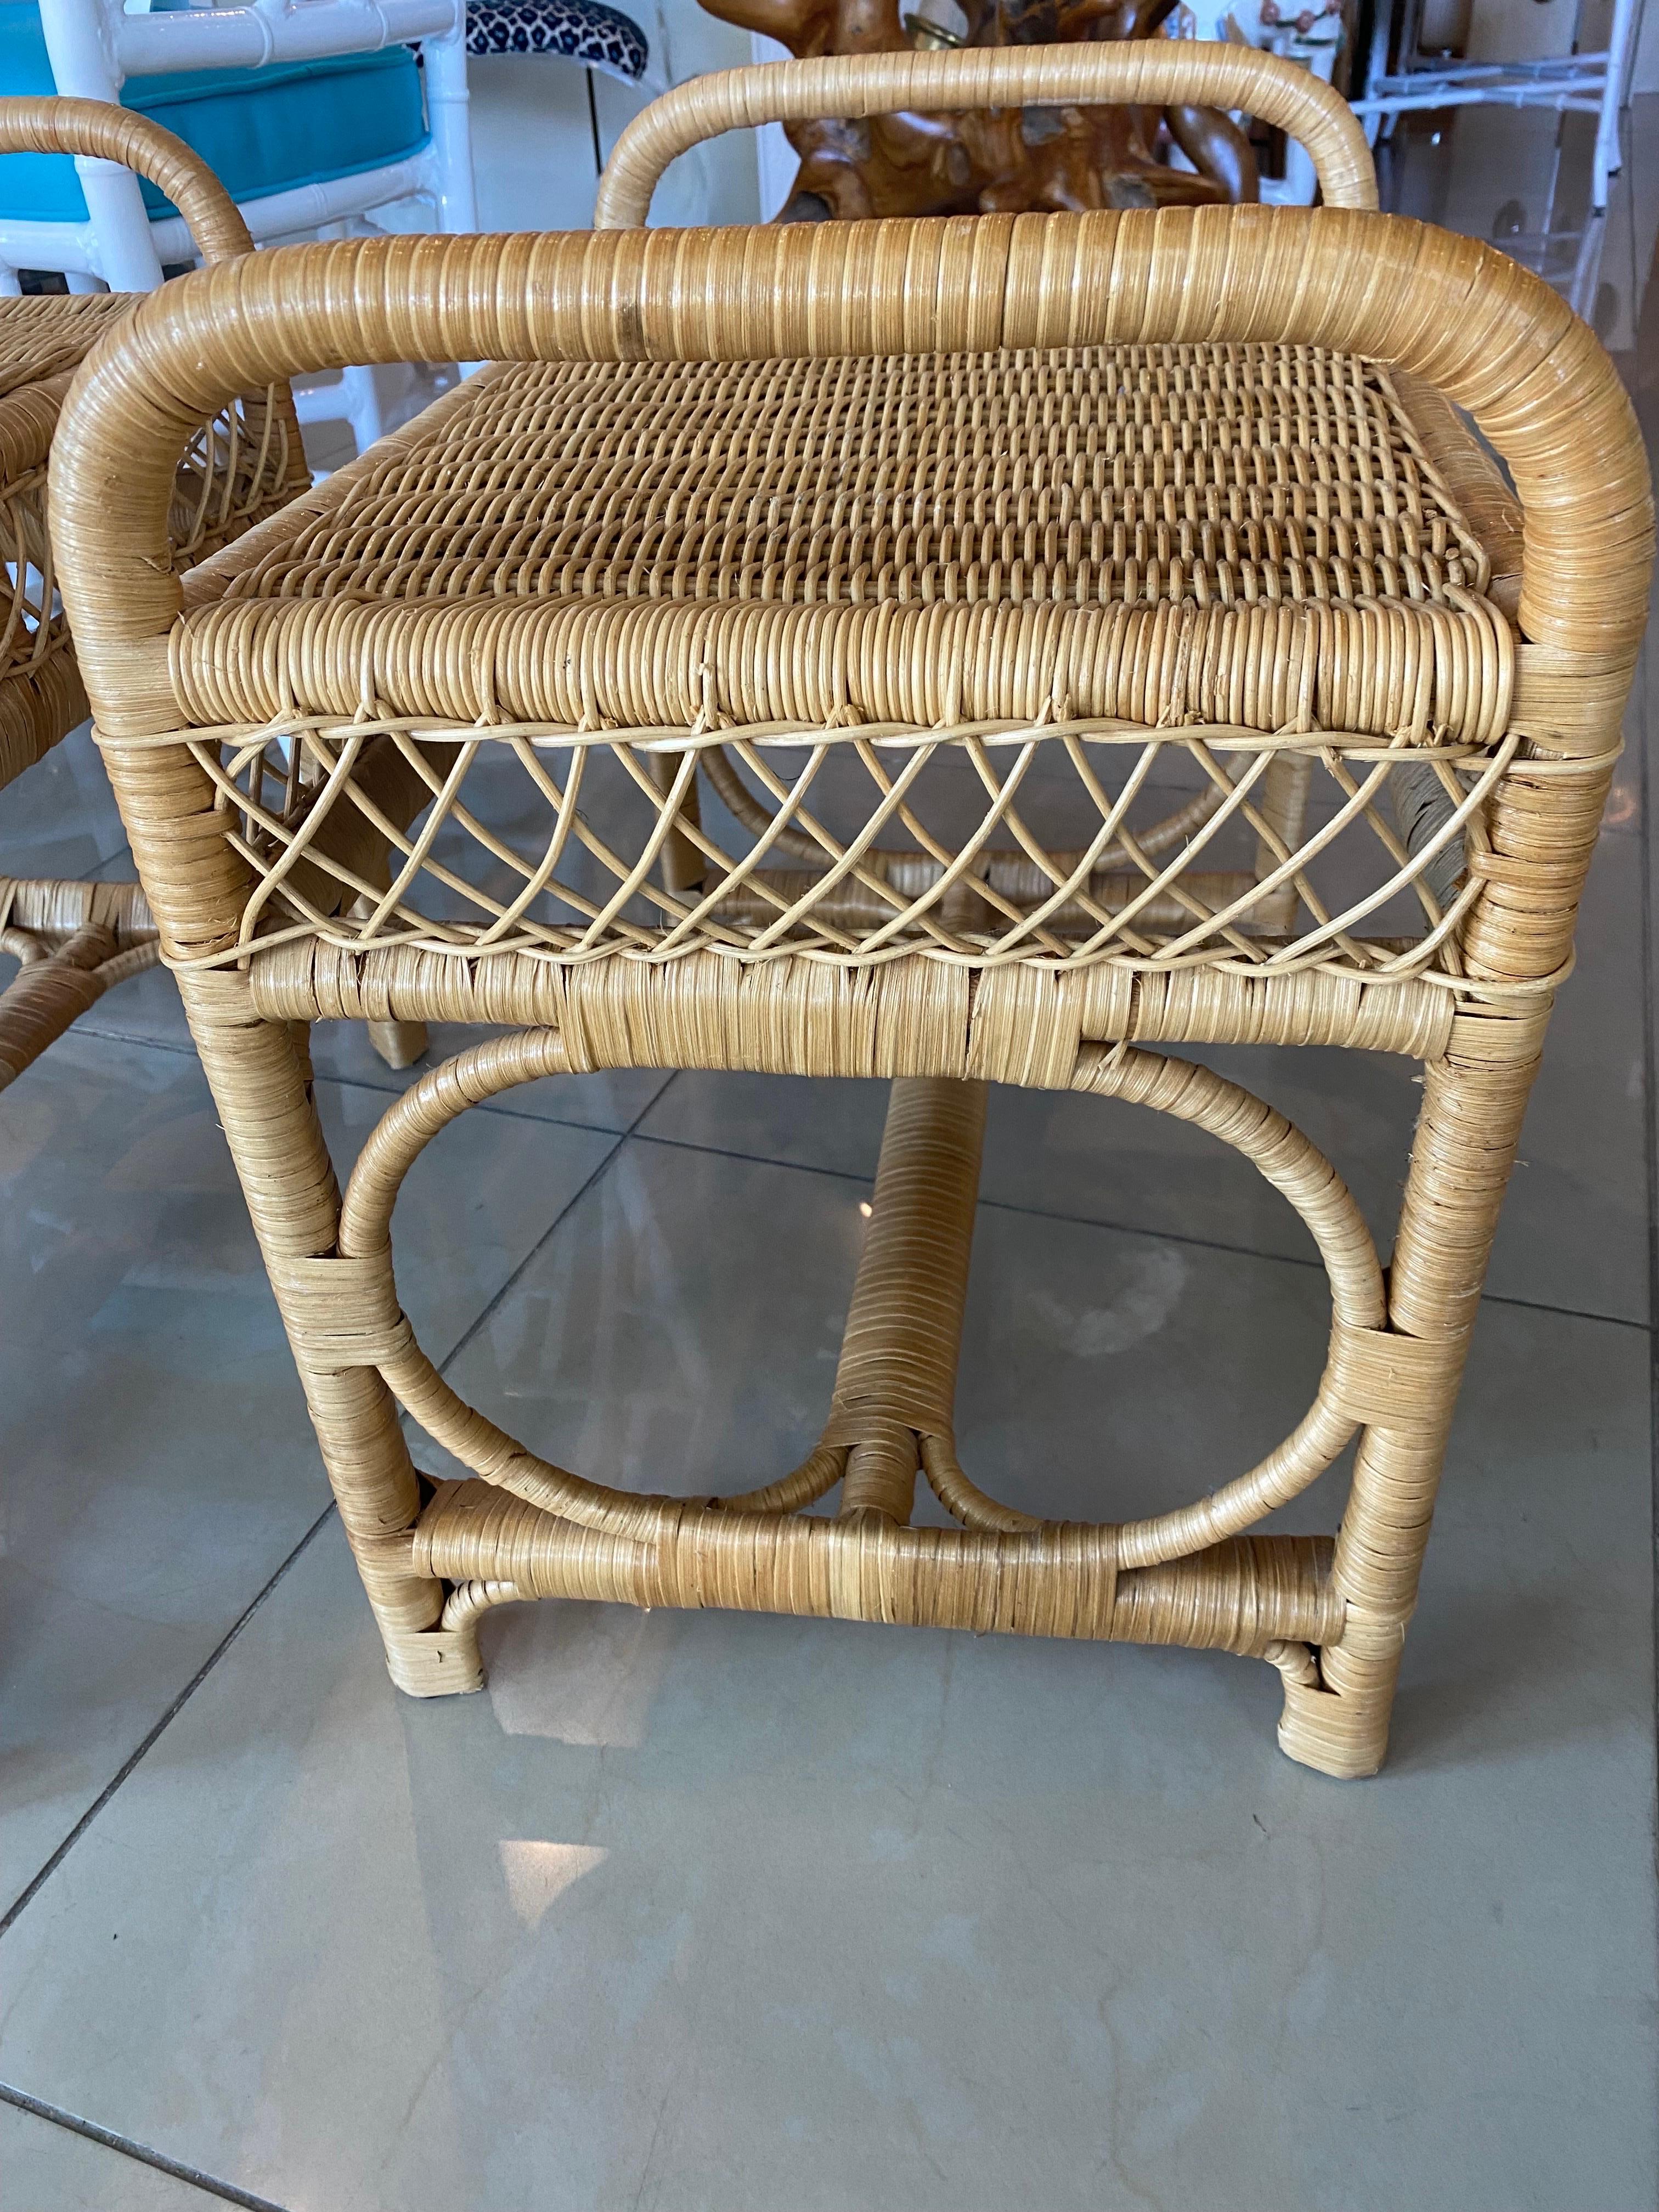 Lovely pair of vintage wicker benches, stools. No damage or defects. Dimensions: 20 w x 14 D x 19 H x 15.5 Seat Height. Please let me know if you would like an additional shipping quote. 